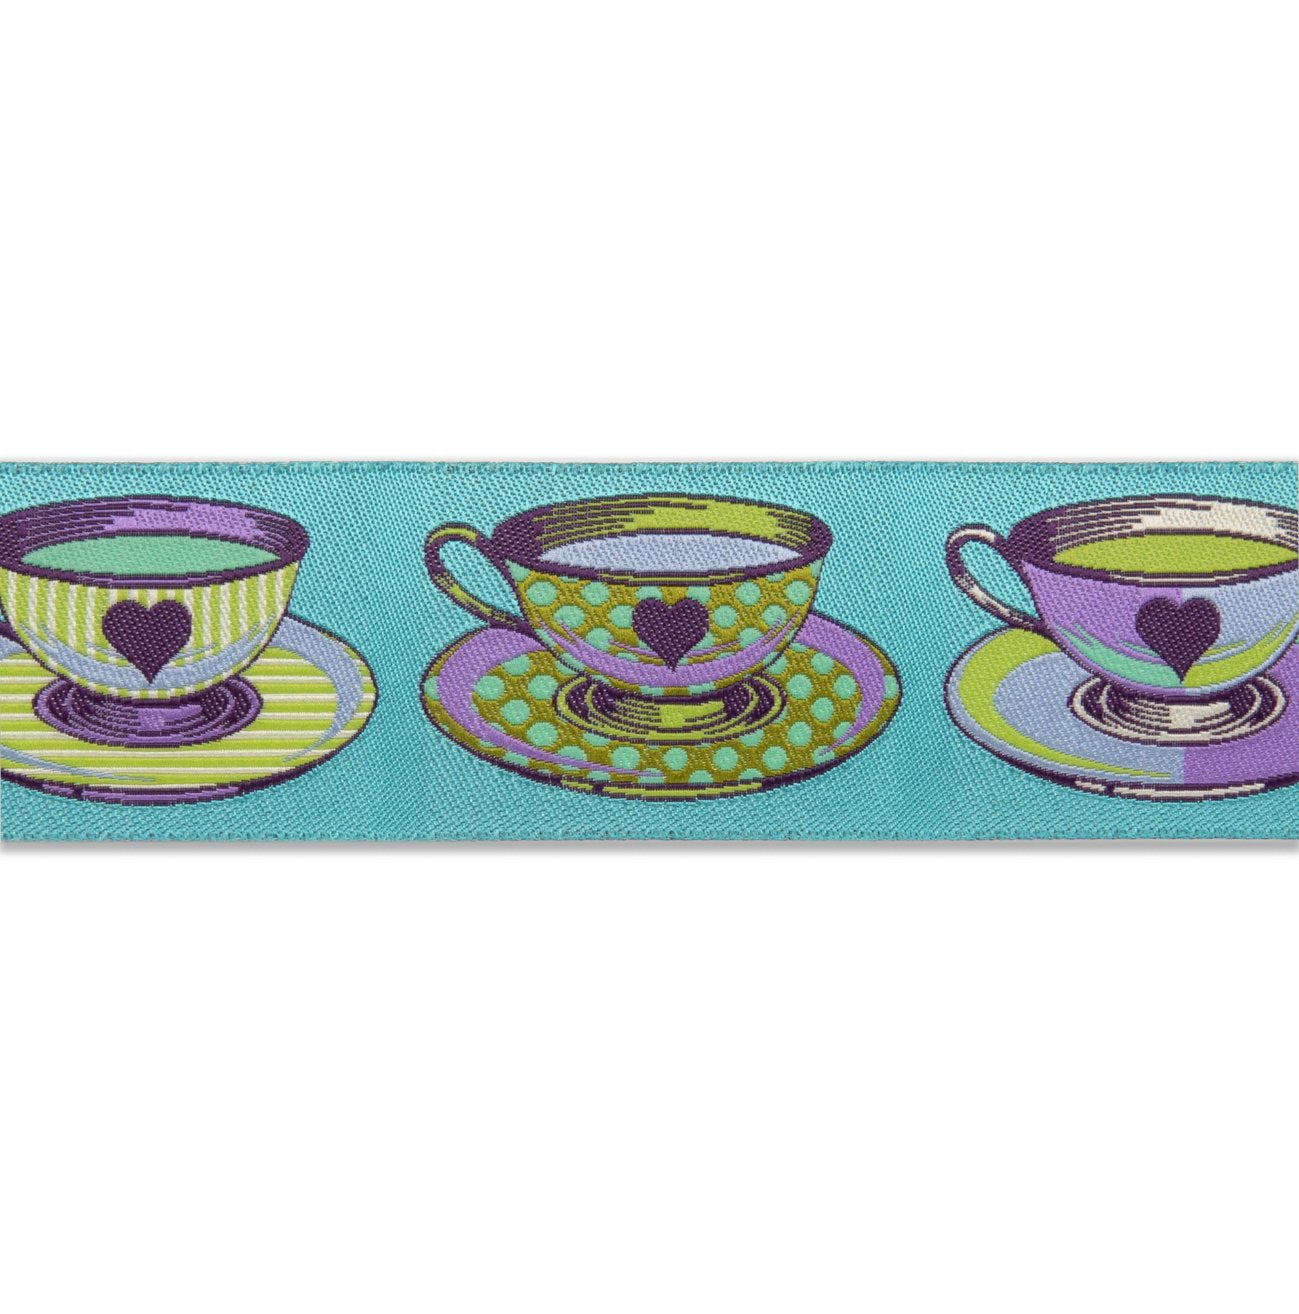 Big Tea Time Blue 1 1-2in Ribbon Tula Pink Curiouser & Curiouser | TK-74/38mm col 1 | Sold by the Yard